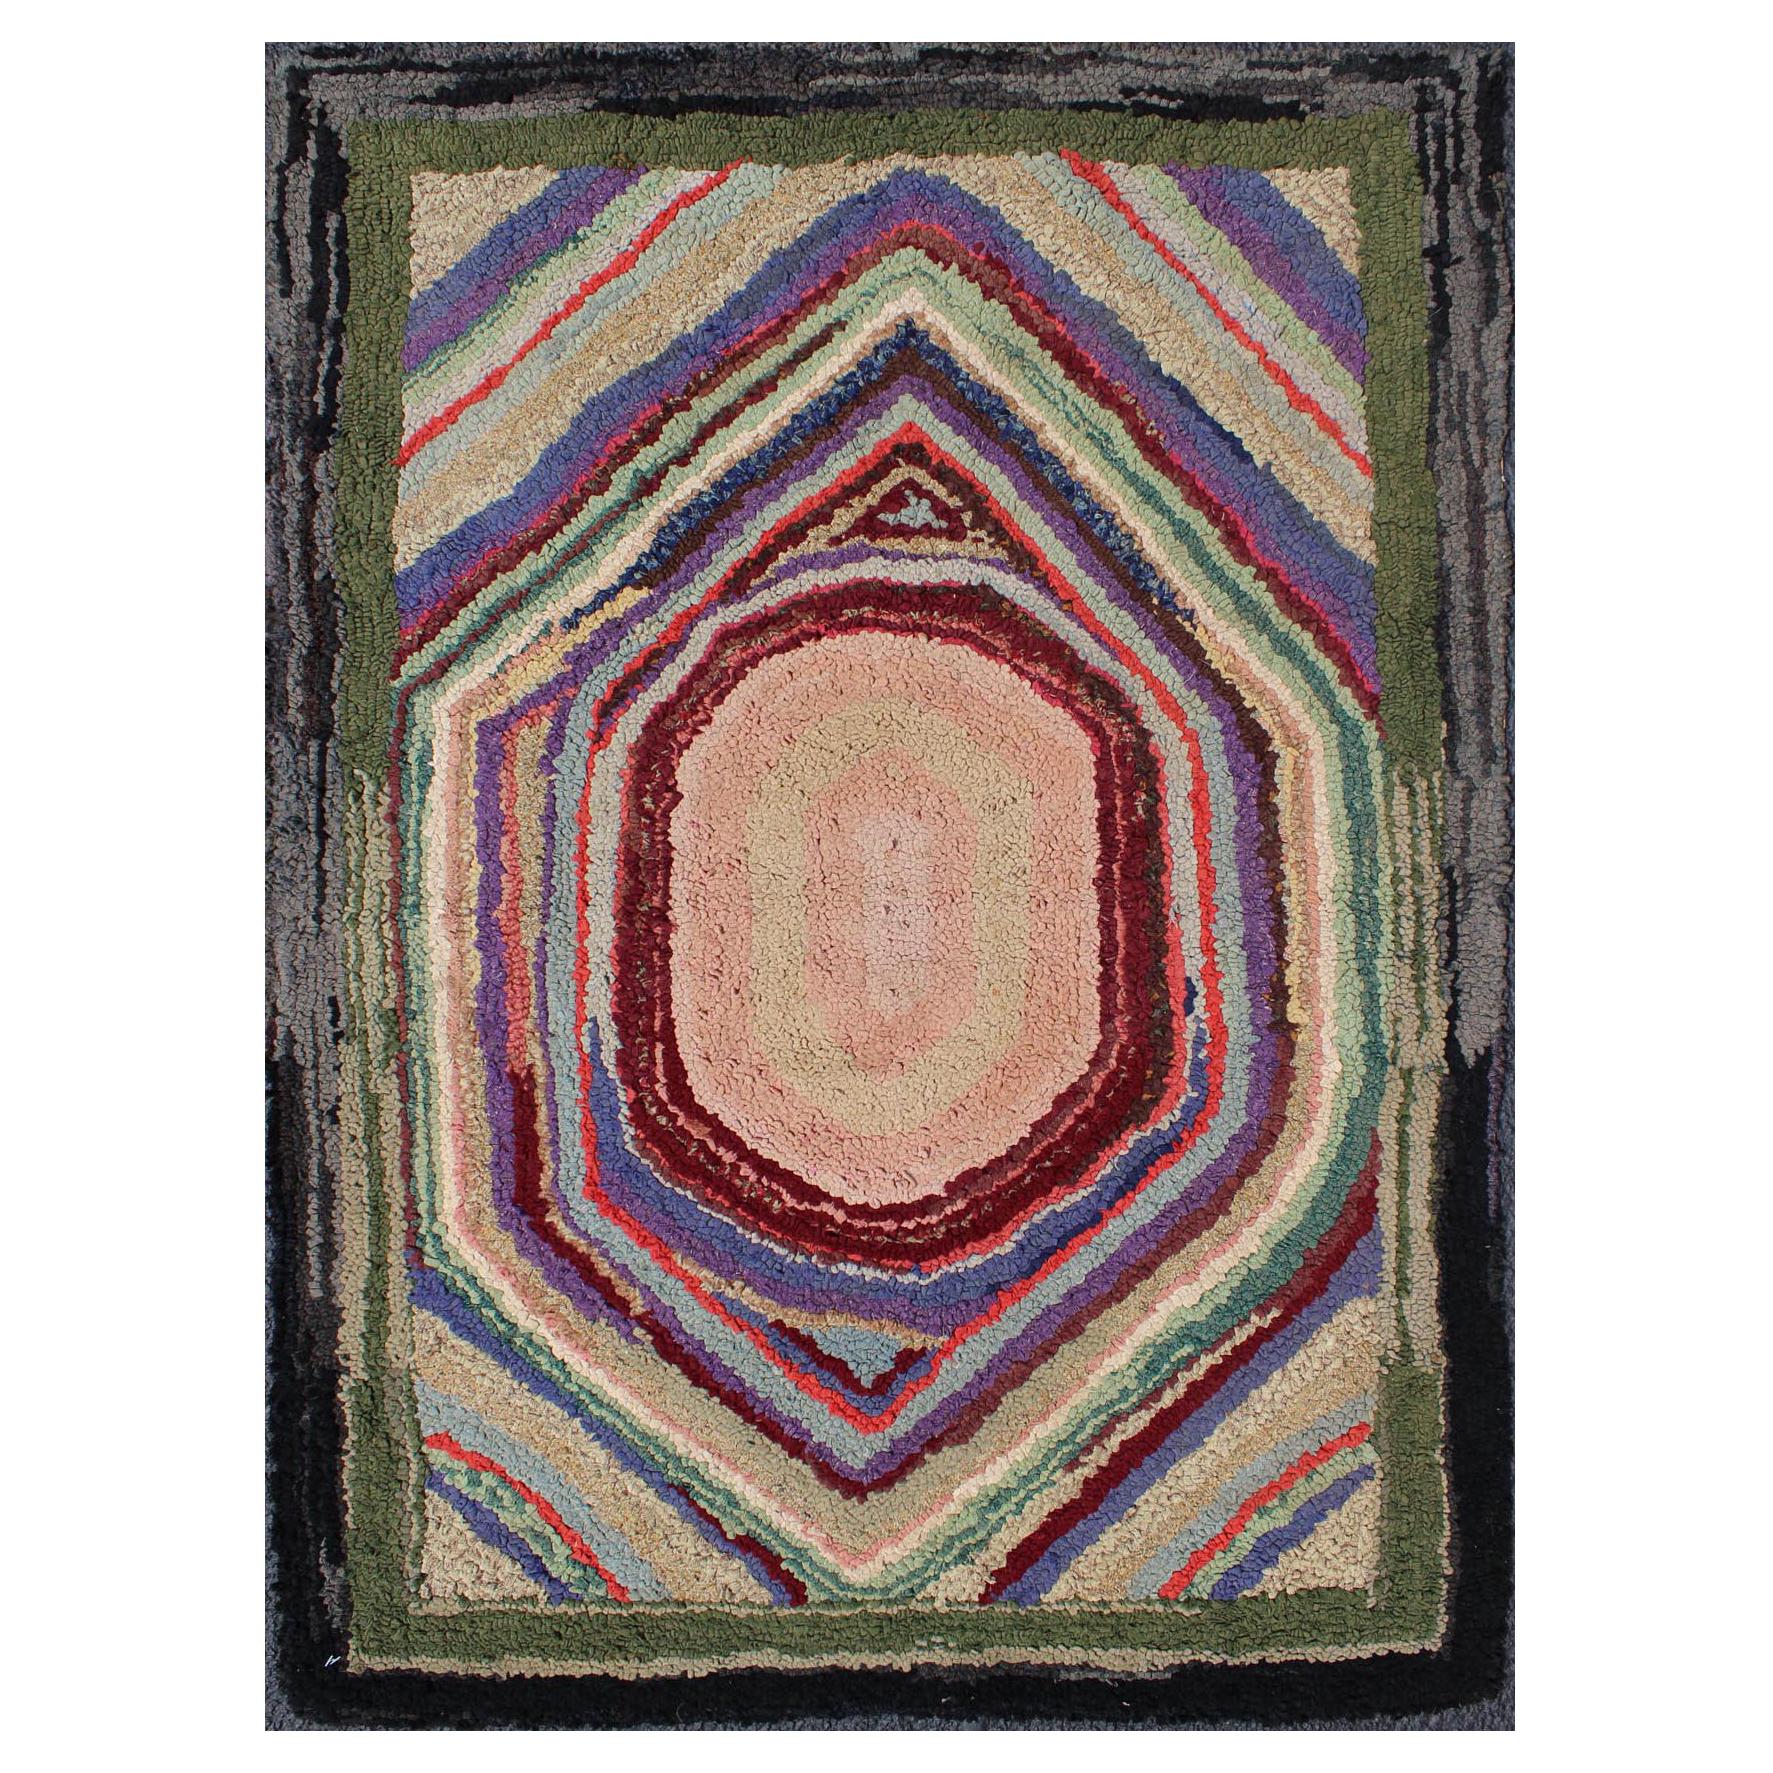 Antique Multicolor American Hooked Rug in Layered Diamond Design & Geometric